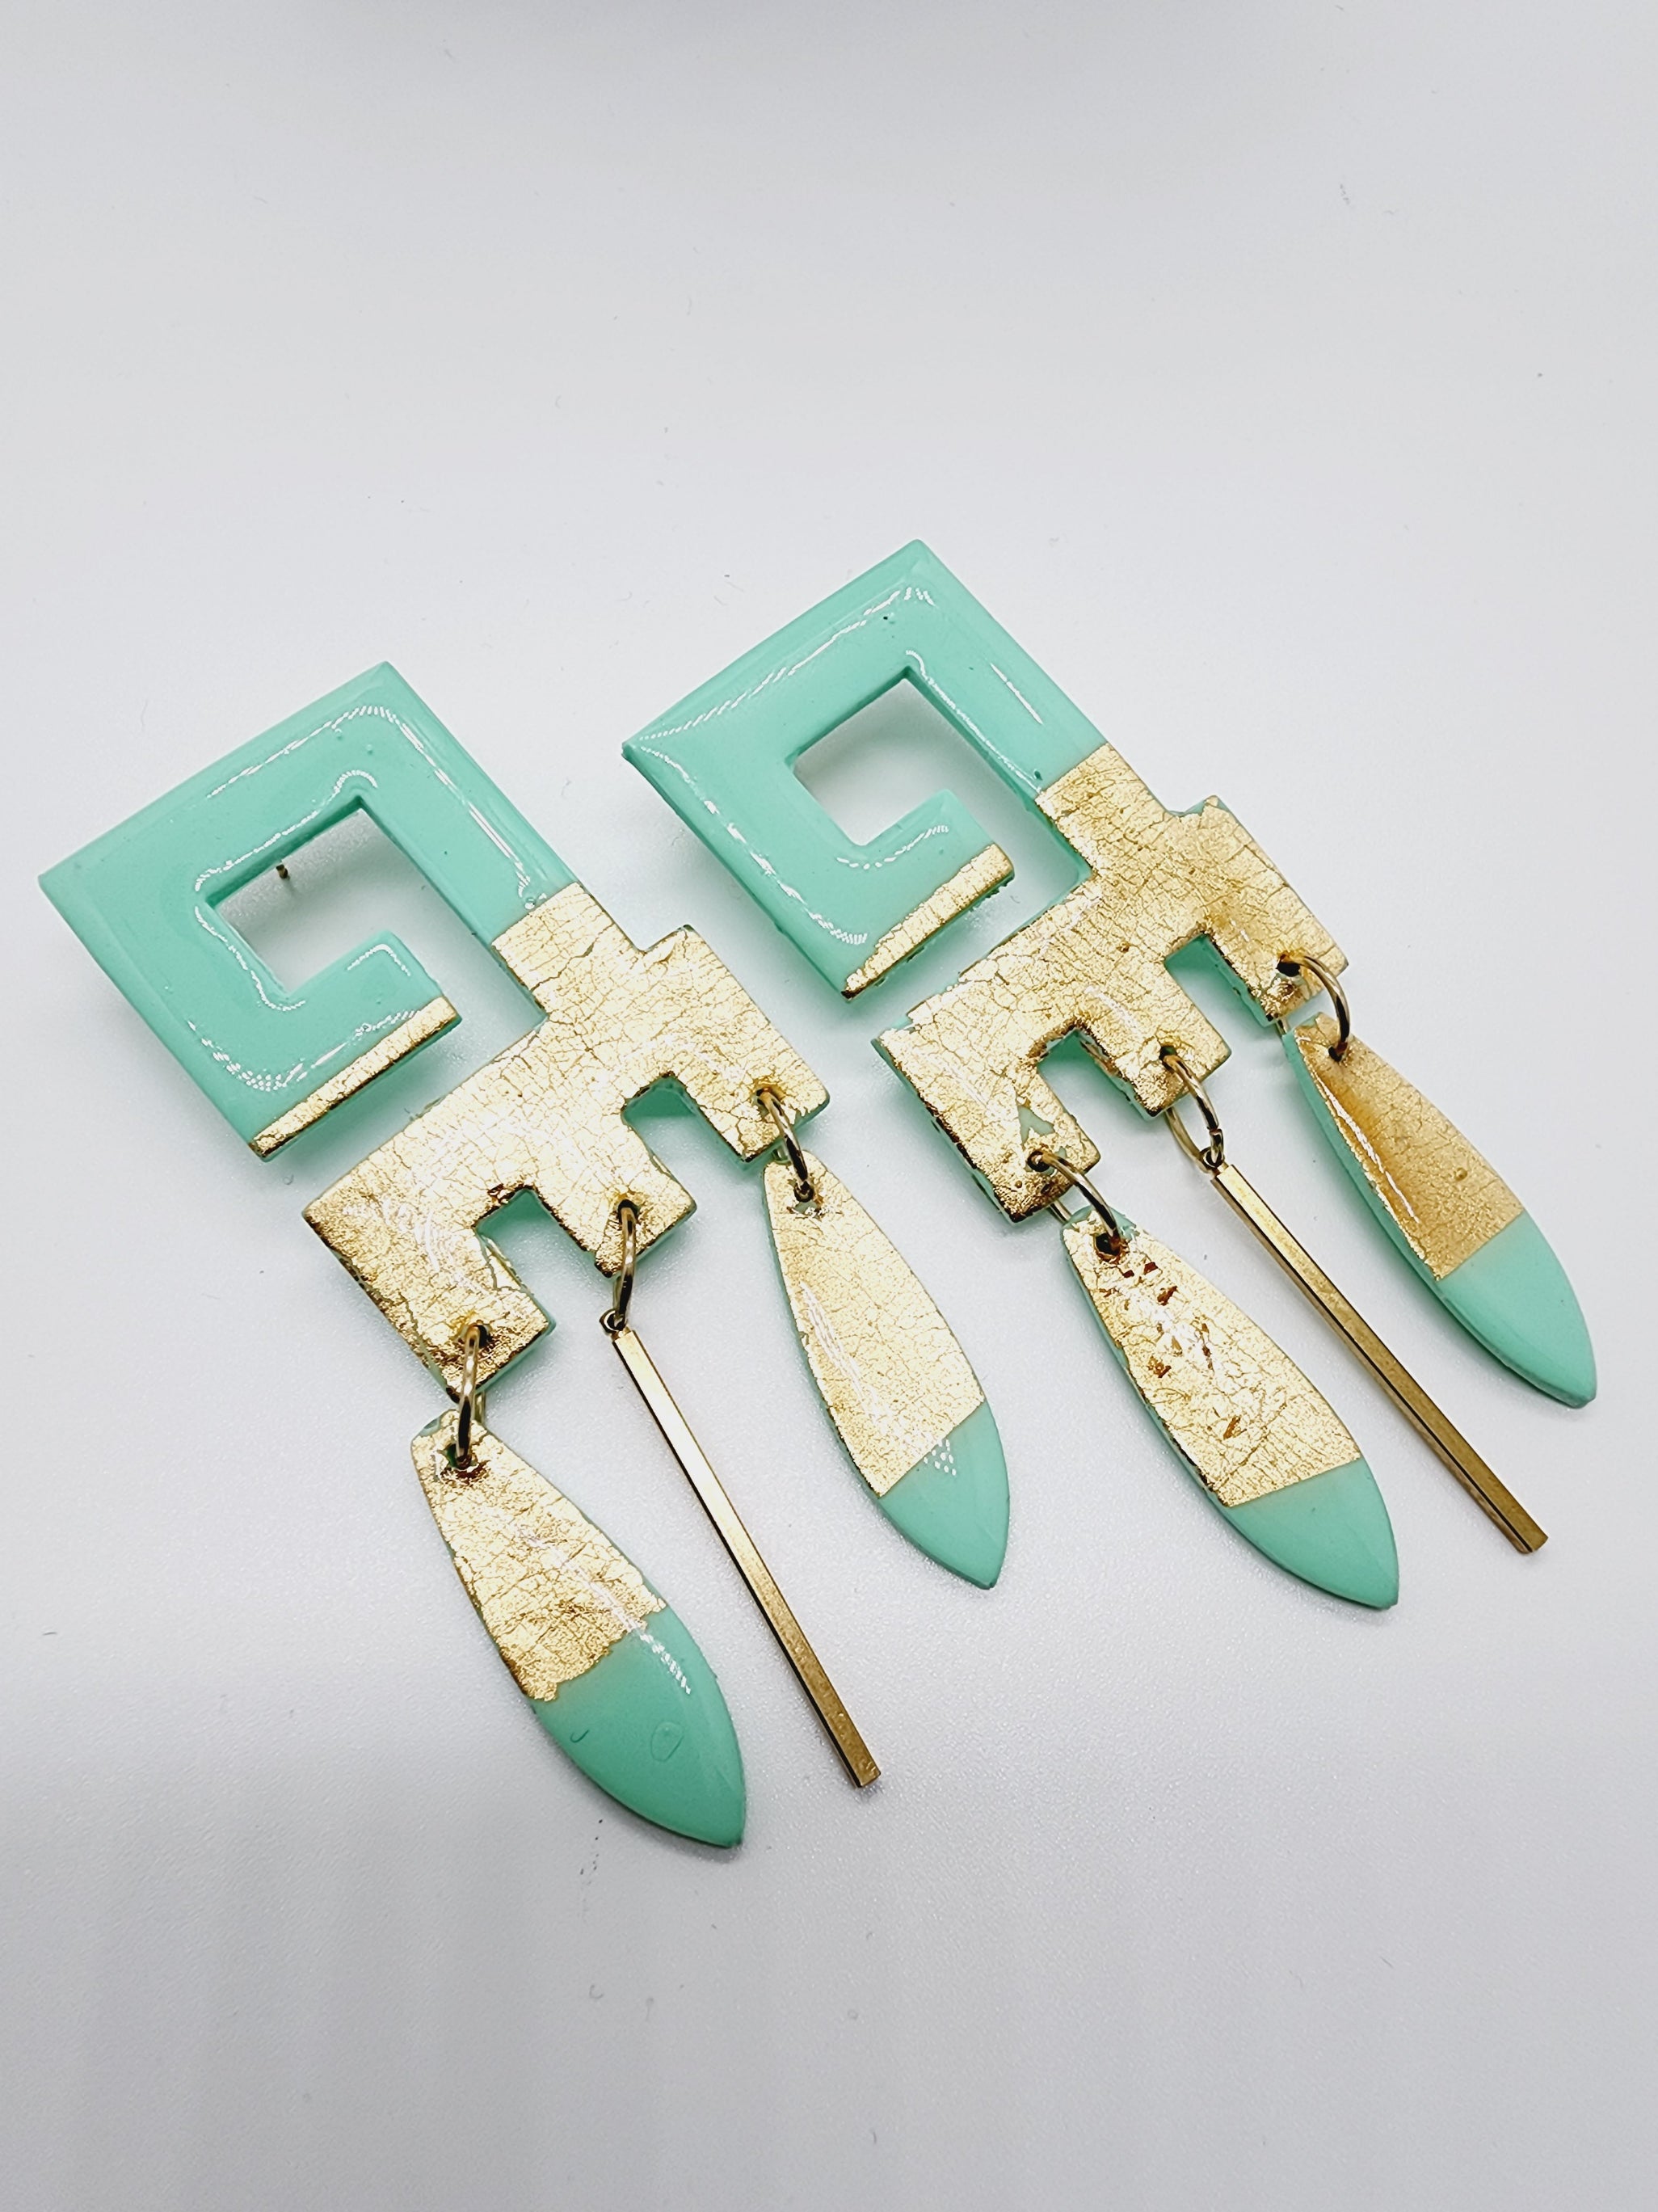 Length: 3.75 inches | Weight: 0.8 ounces   Distinctly You! These handmade earrings are made using seafoam green and gold flake dangle polymer clay, hypoallergic hooks with back closures. 